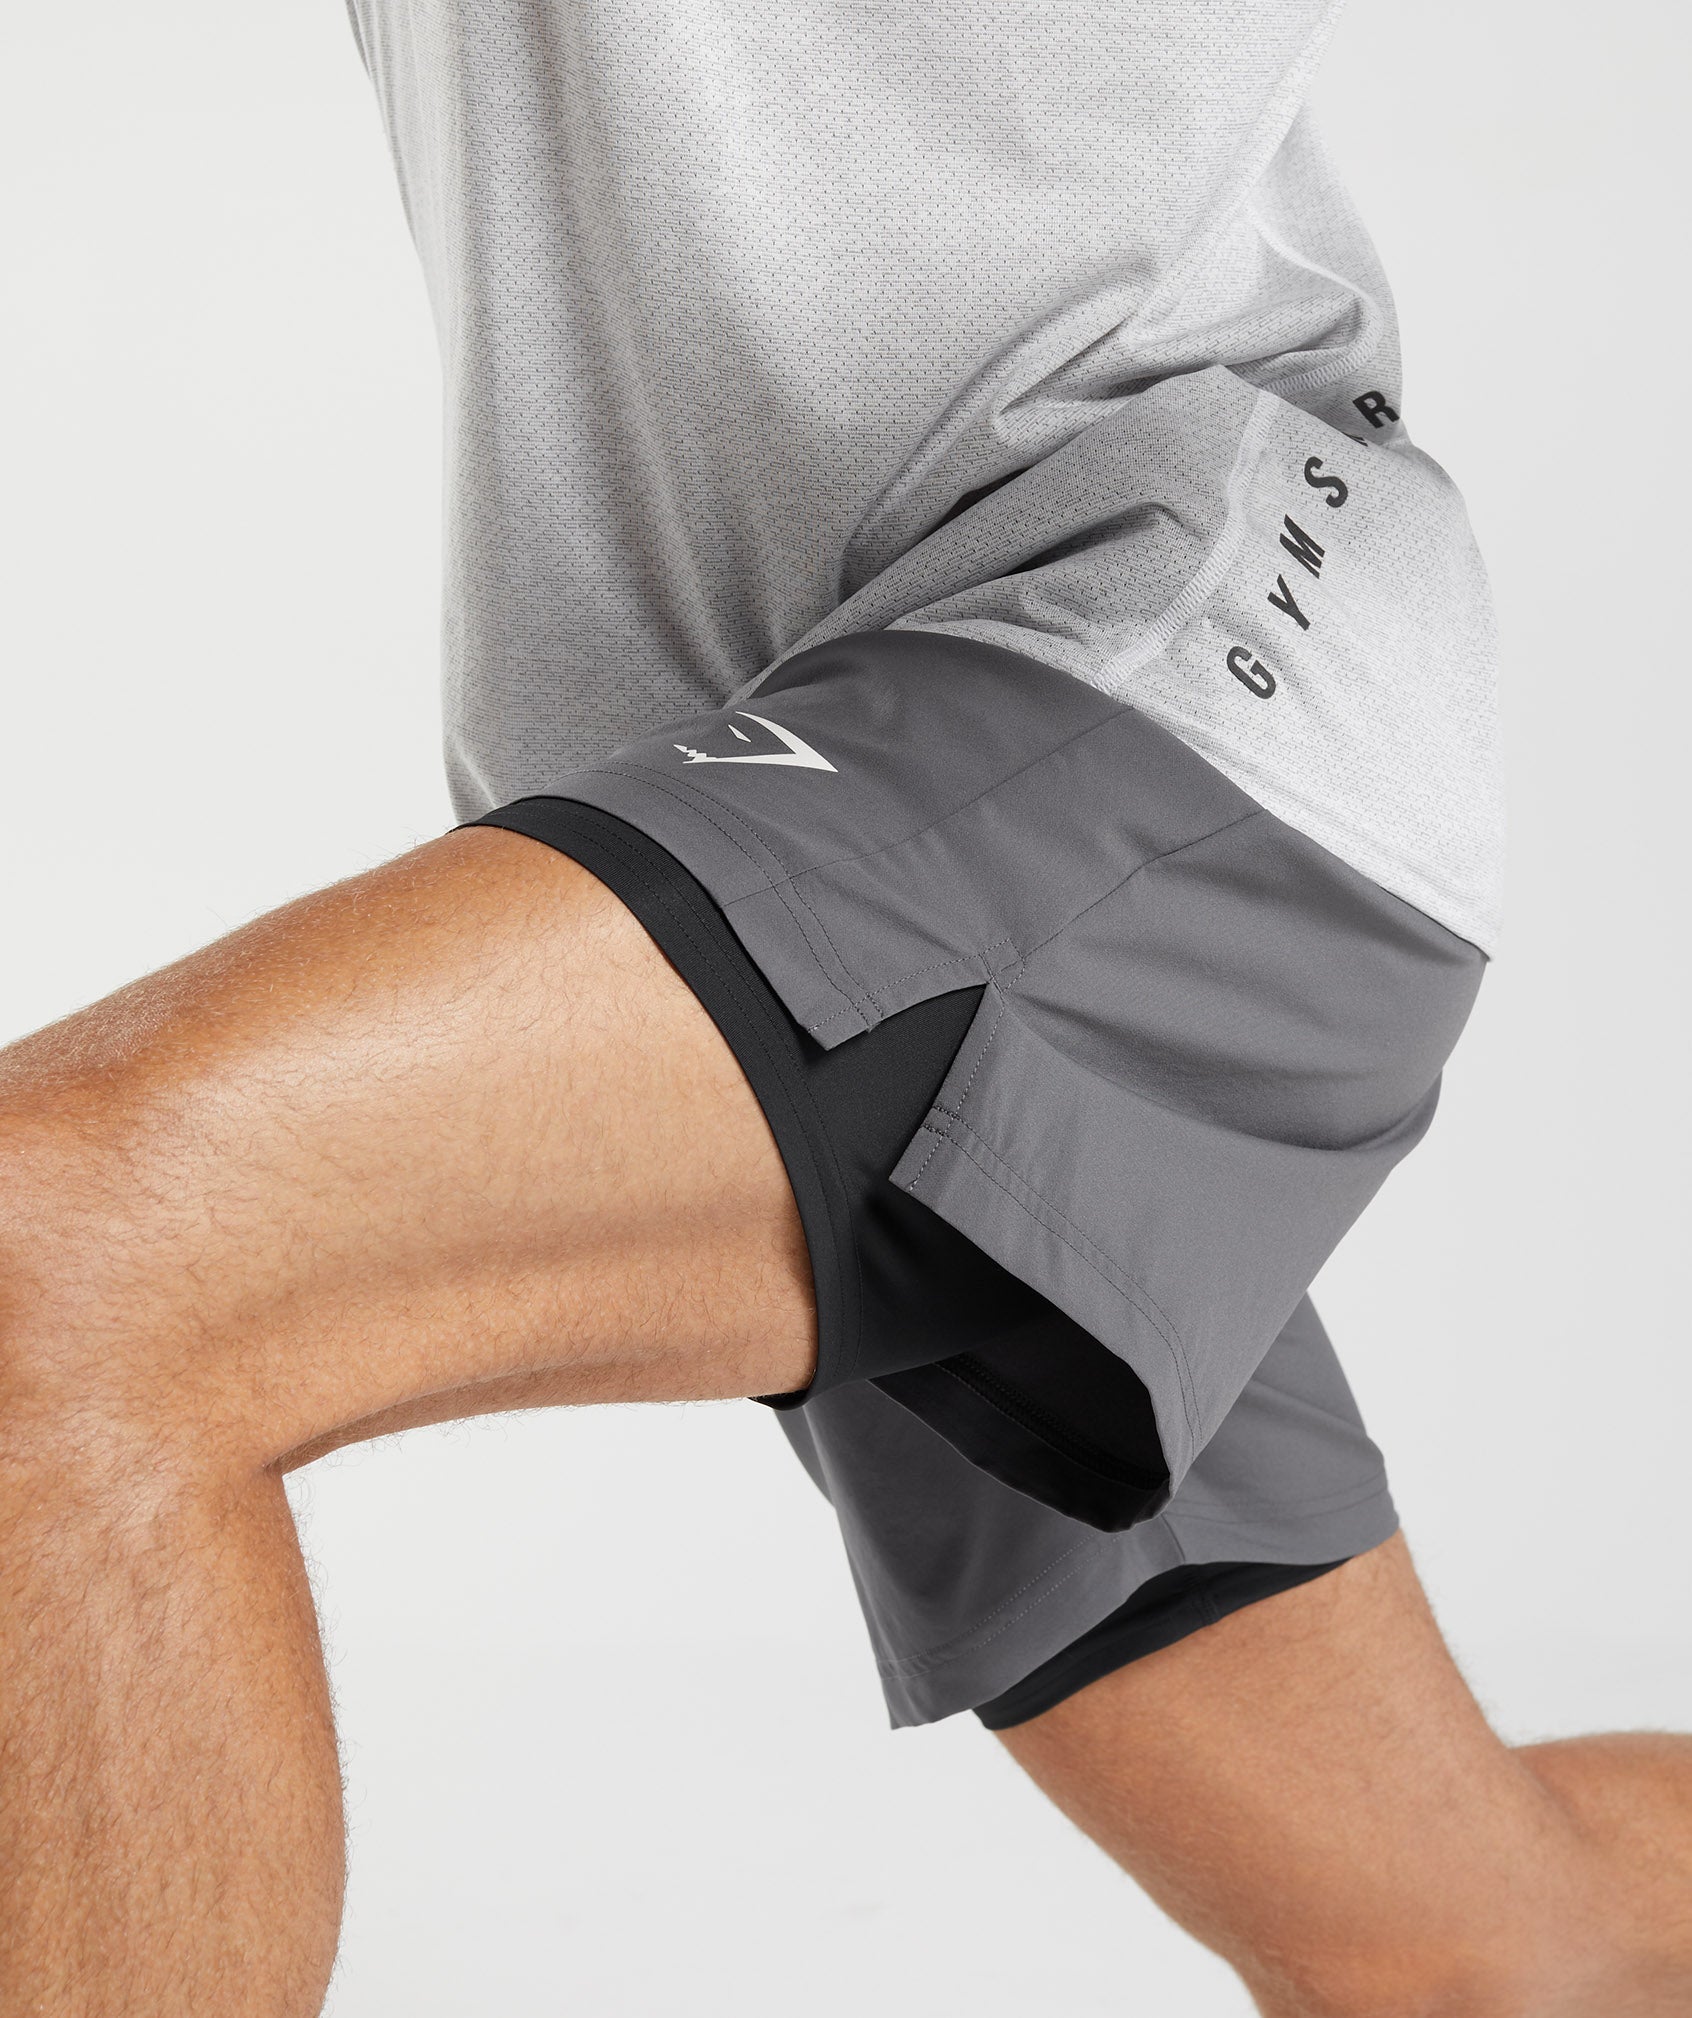 Sport 7" 2 In 1 Shorts in Silhouette Grey/Black - view 3